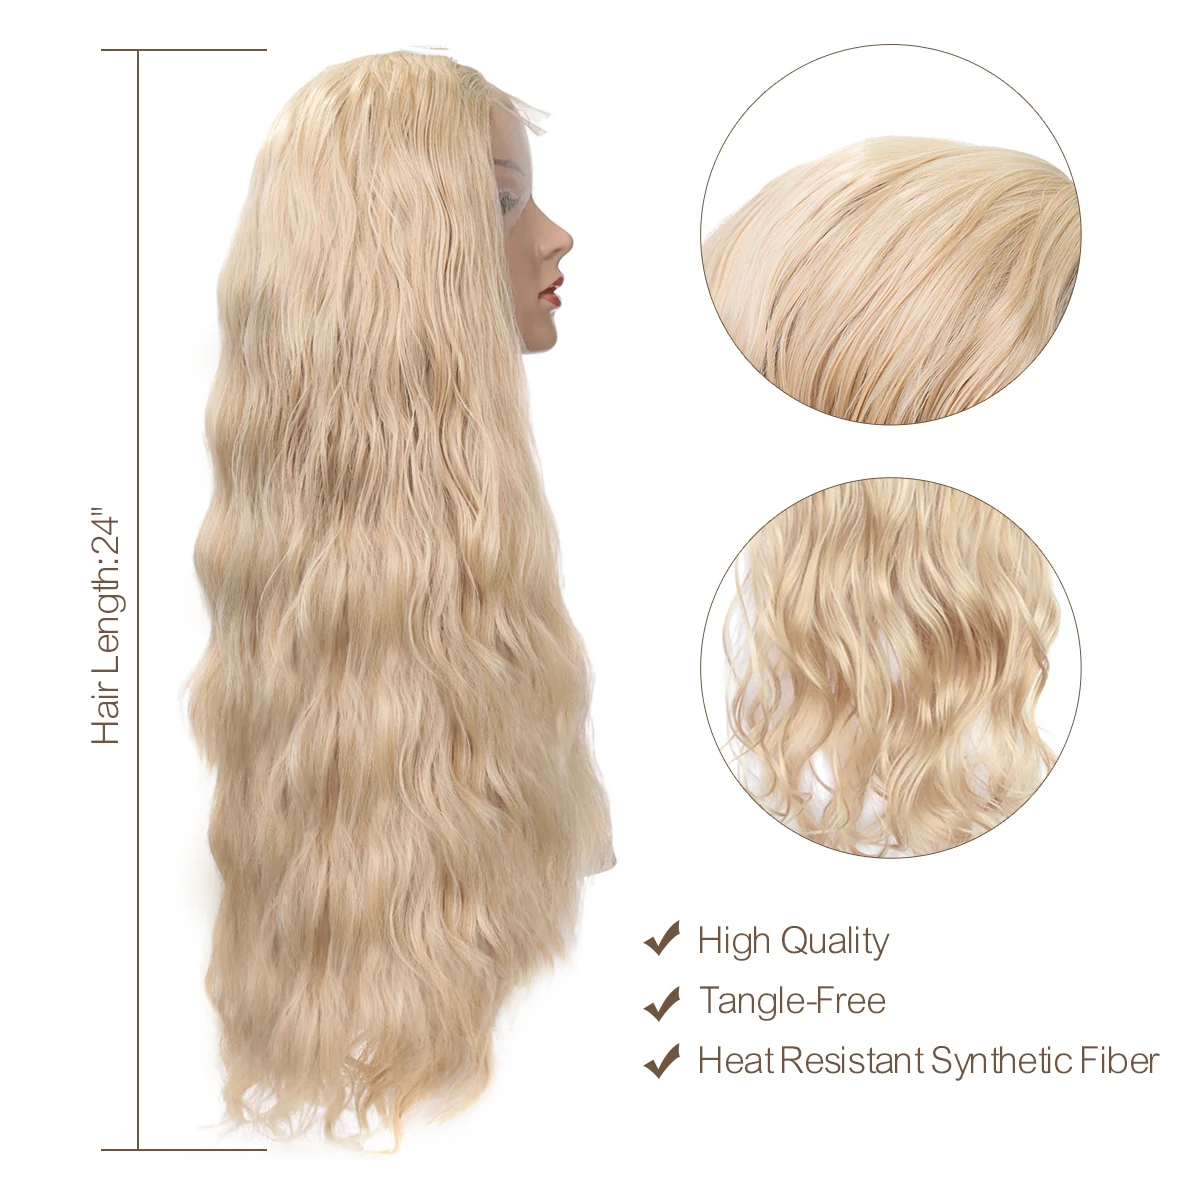 Find 24 Inch Front Lace Golden Blonde Curly Synthetic Wigs for Sale on Gipsybee.com